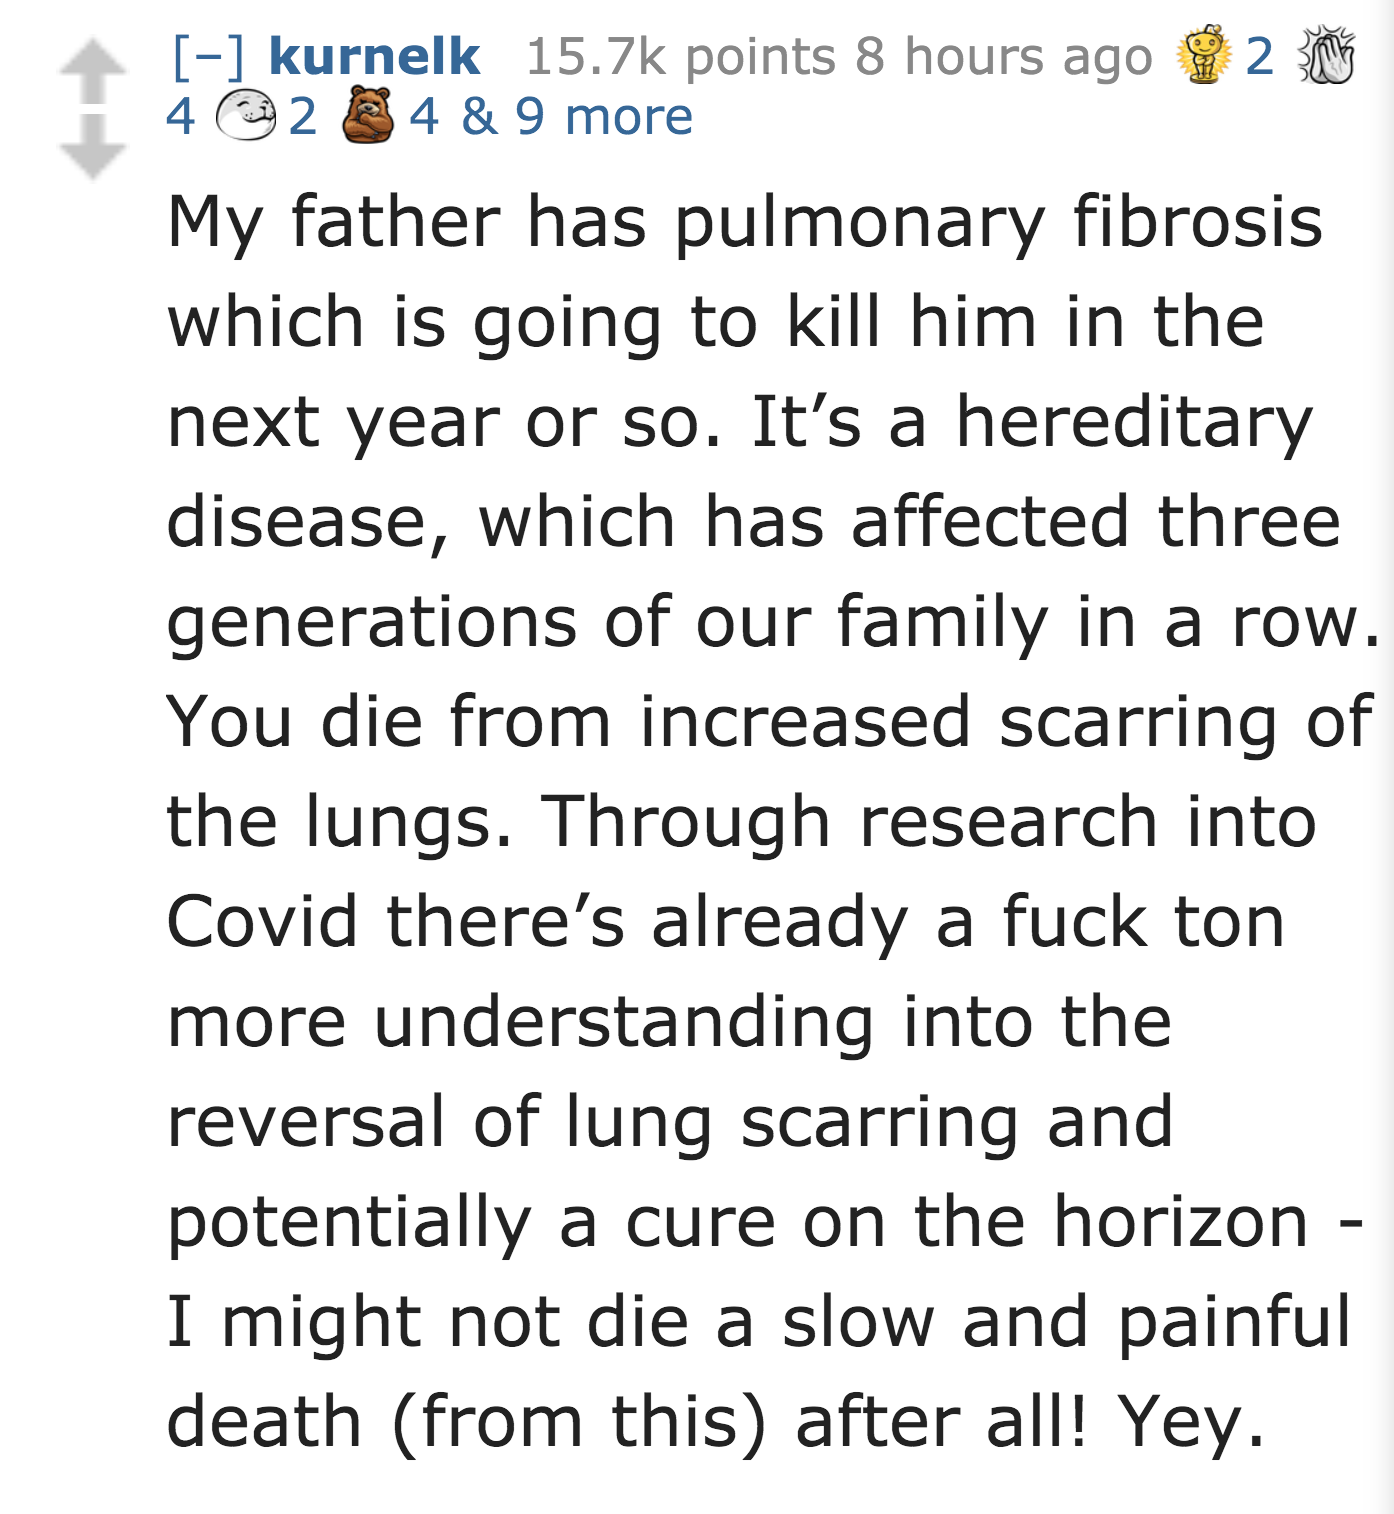 My father has pulmonary fibrosis which is going to kill him in the next year or so. It's a hereditary disease, which has affected three generations of our family in a row. You die from increased scarrin